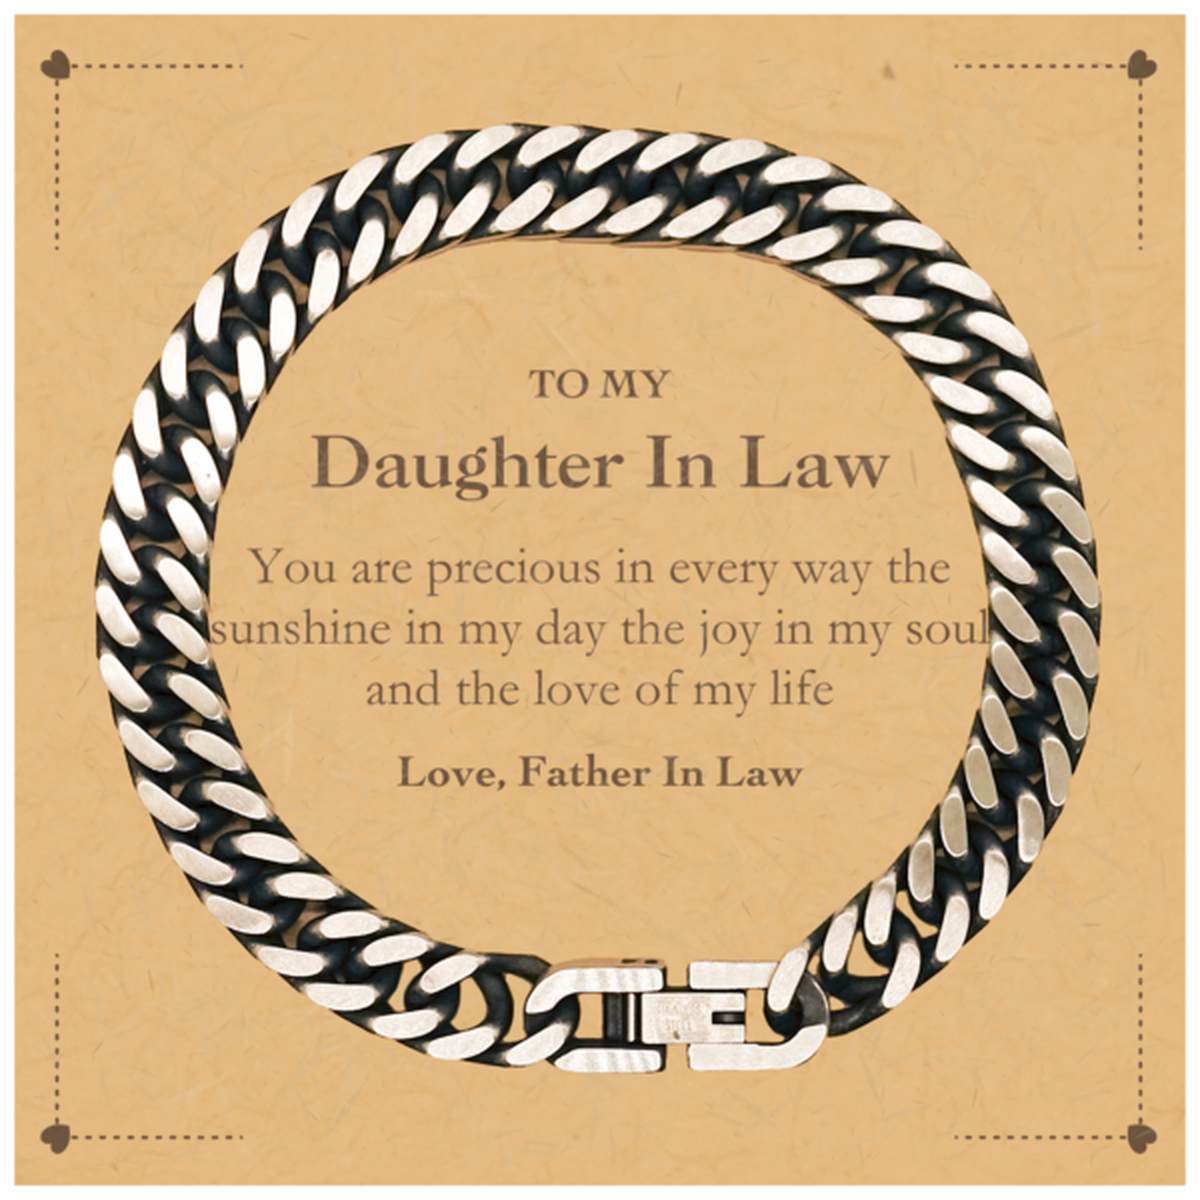 Graduation Gifts for Daughter In Law Cuban Link Chain Bracelet Present from Father In Law, Christmas Daughter In Law Birthday Gifts Daughter In Law You are precious in every way the sunshine in my day. Love, Father In Law